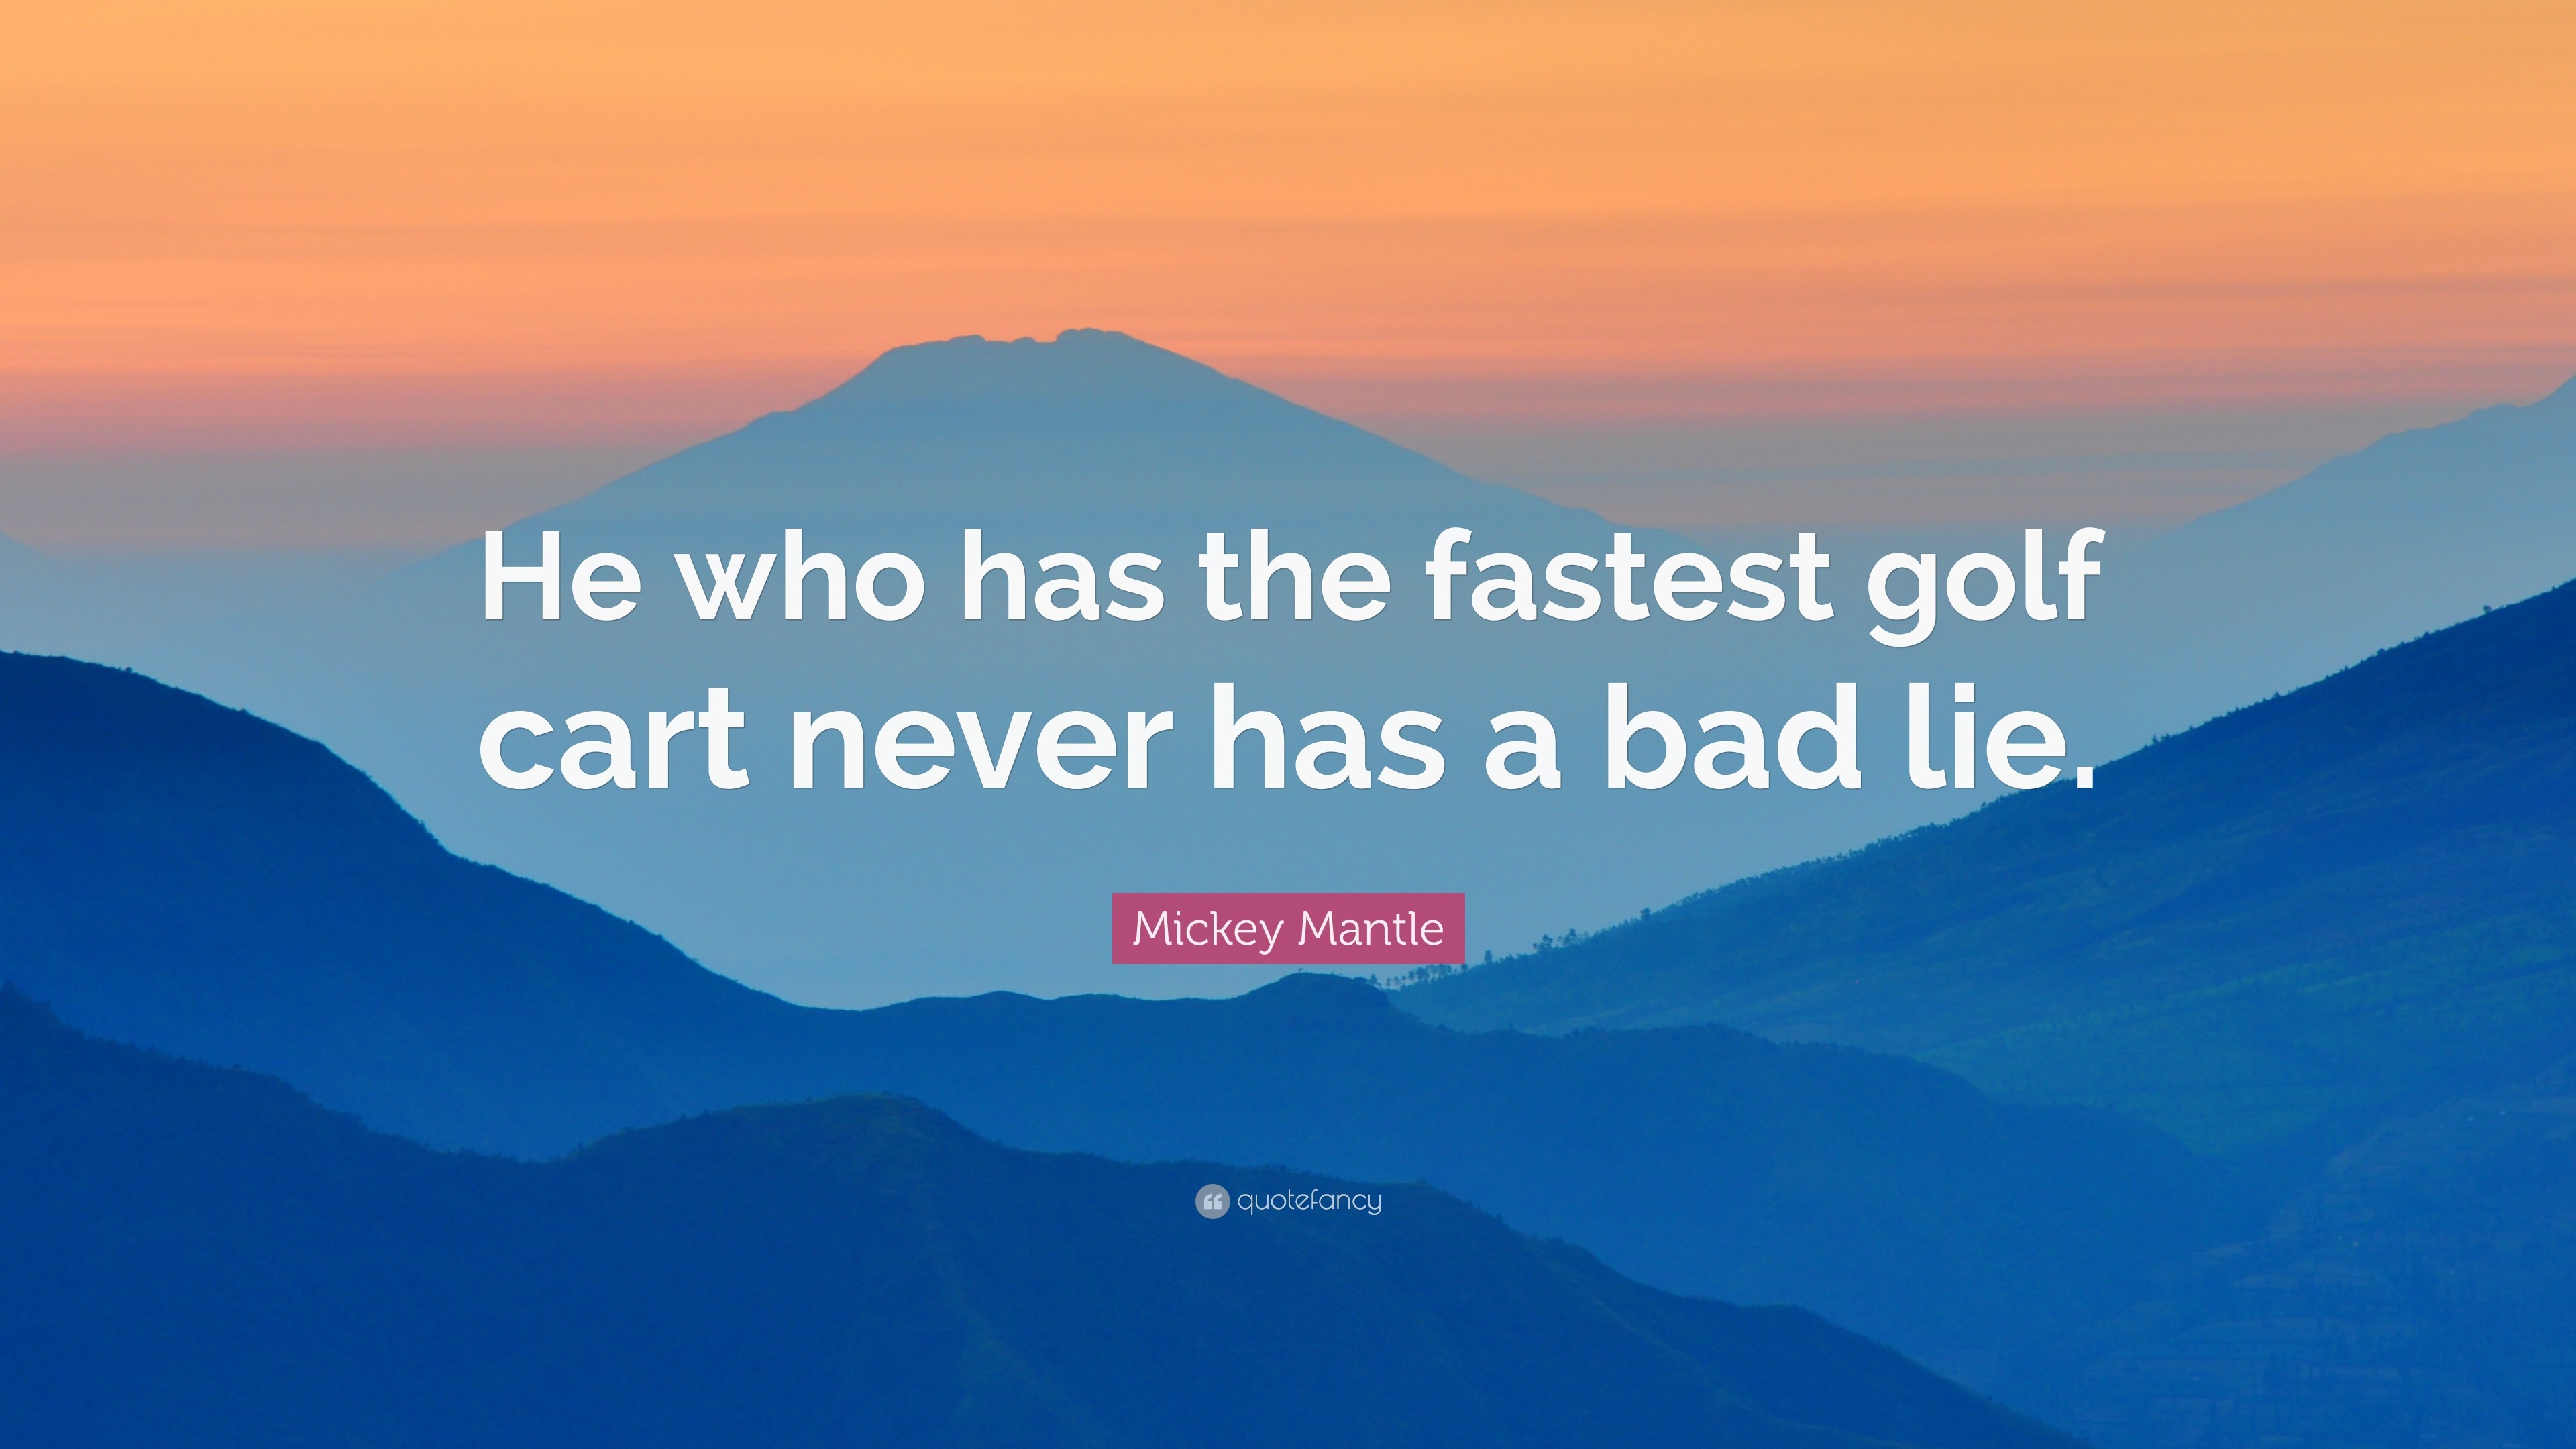 3840x2160 Mickey Mantle Quote: “He who has the fastest golf cart never has a bad